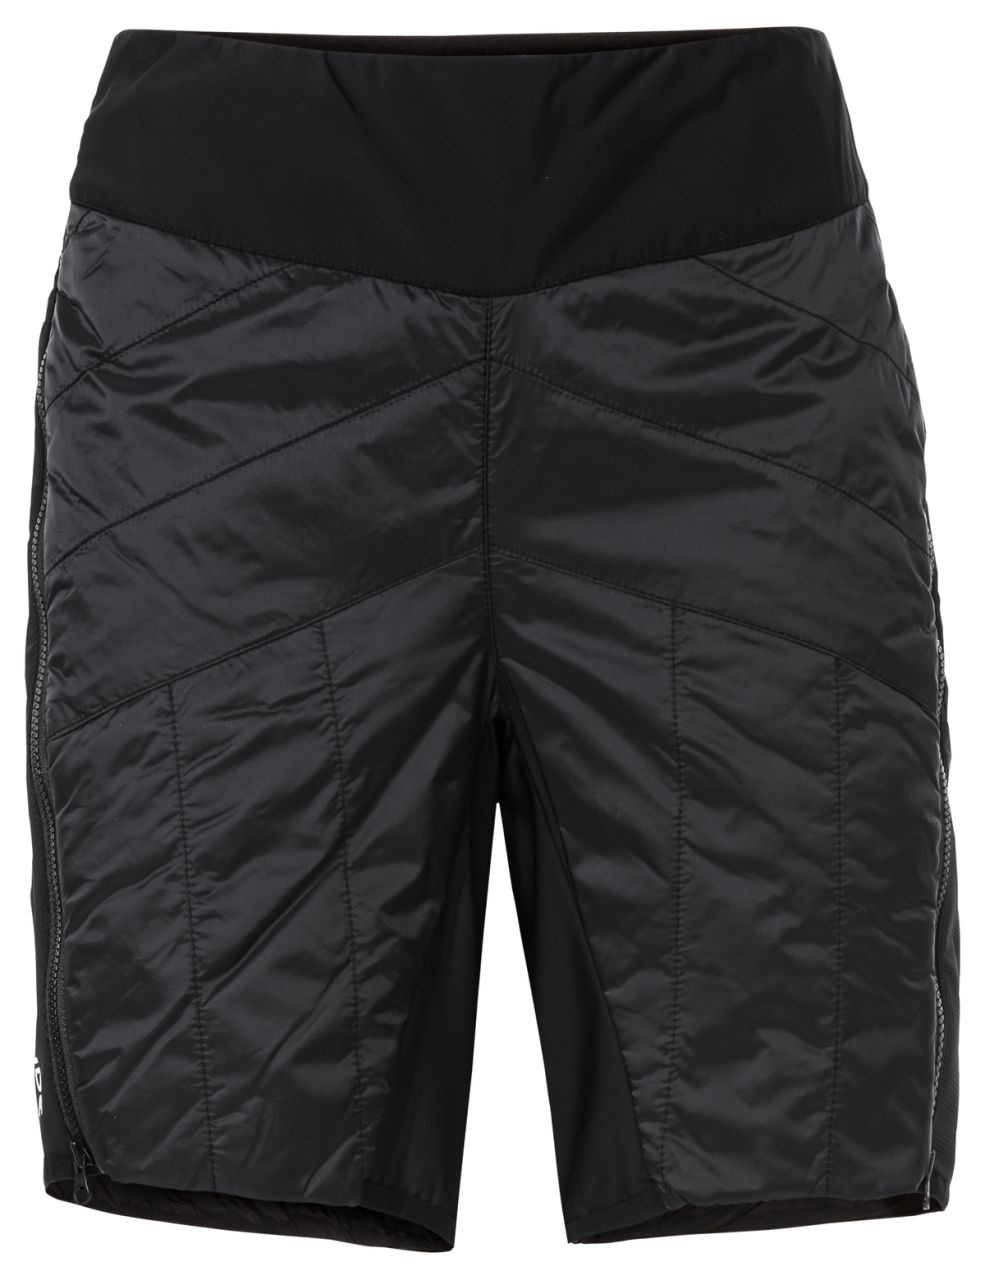 Vaude W's Sesvenna Shorts III - Made From Recycled Polyamide Black Pants